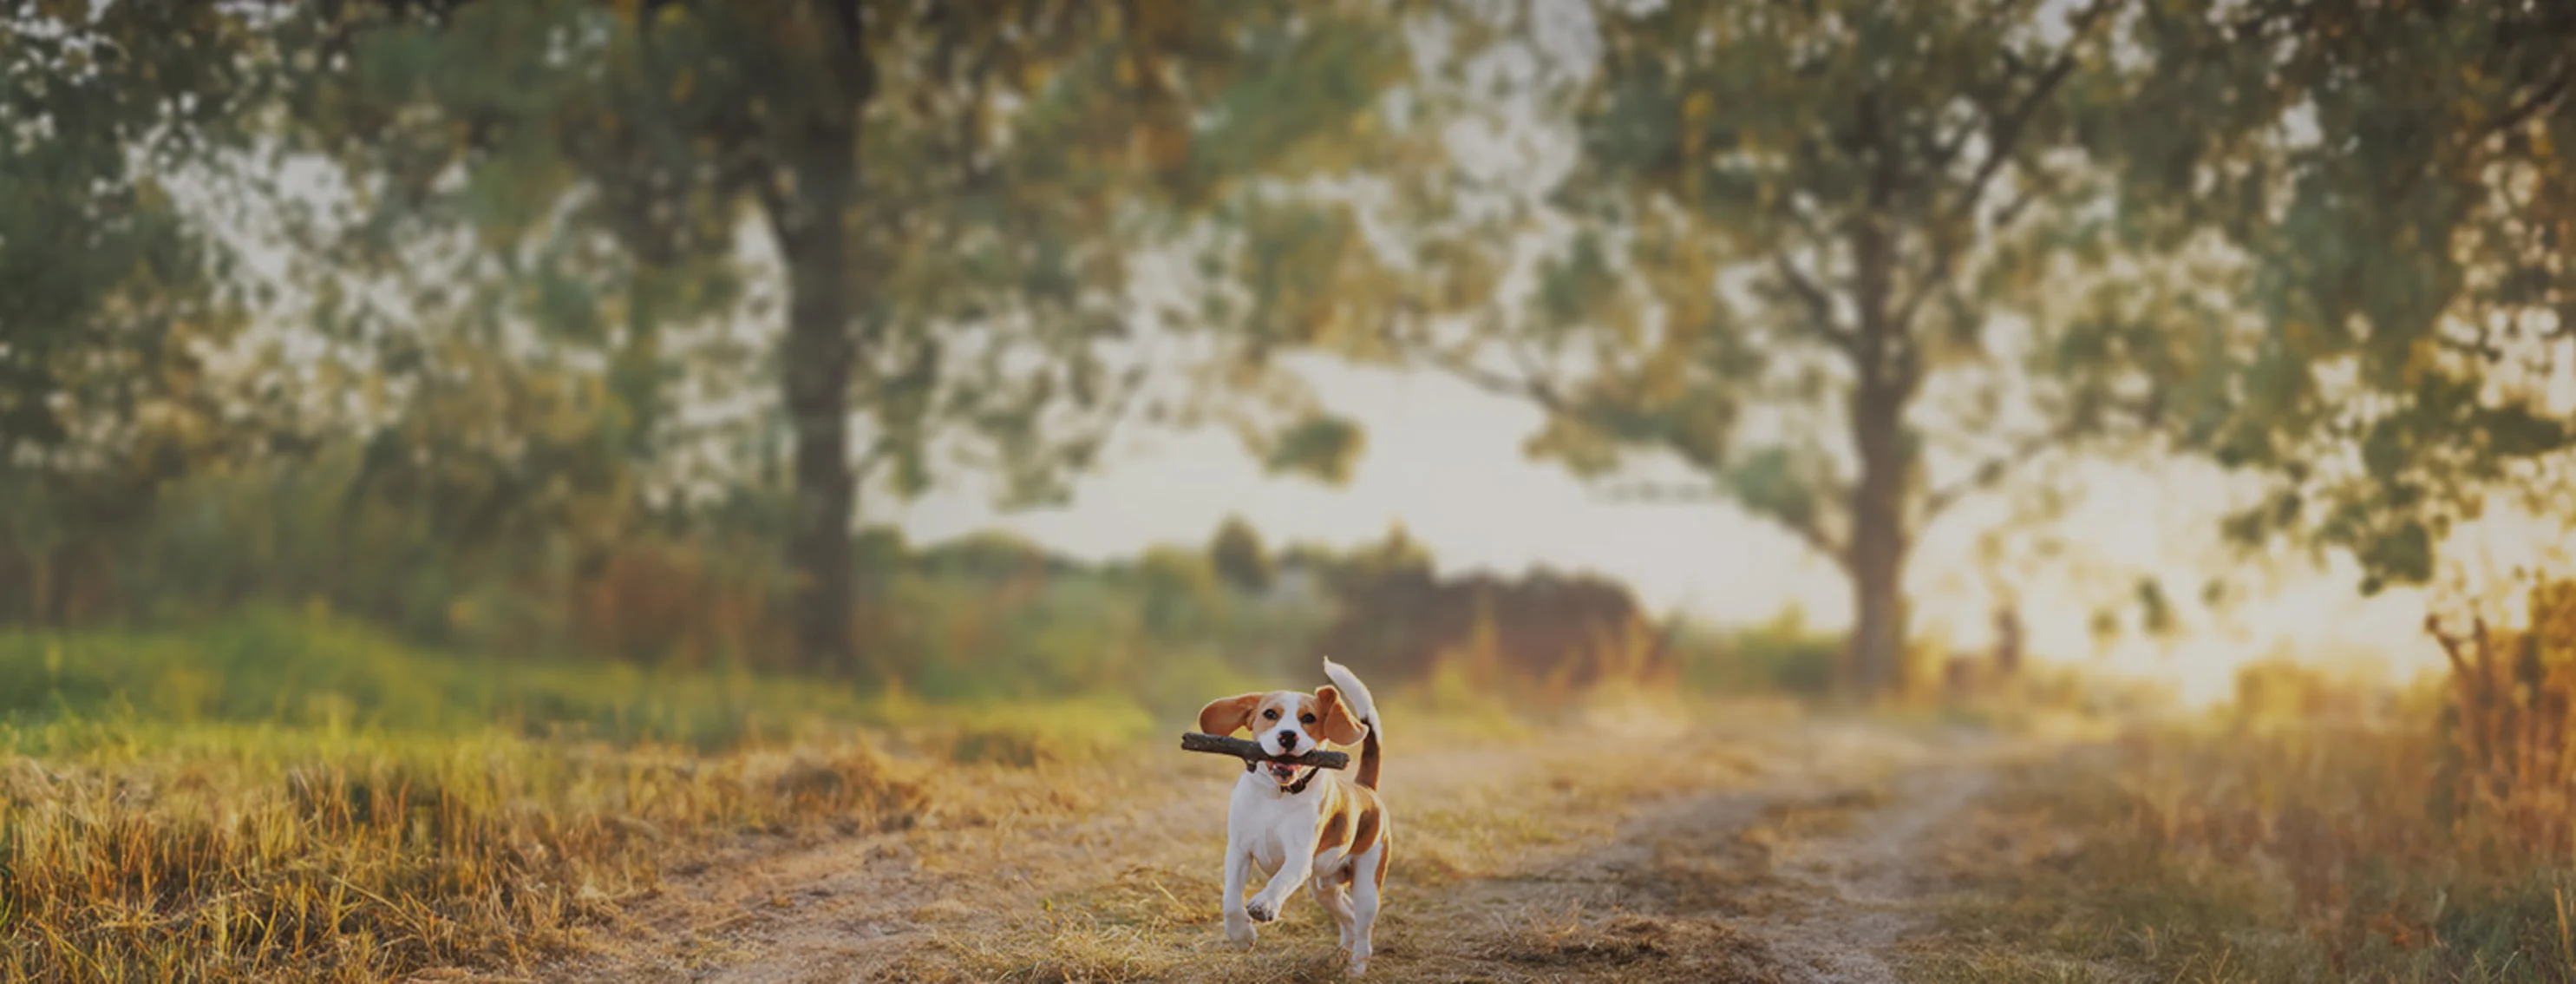 A beagle running through a rural field with a stick in its mouth